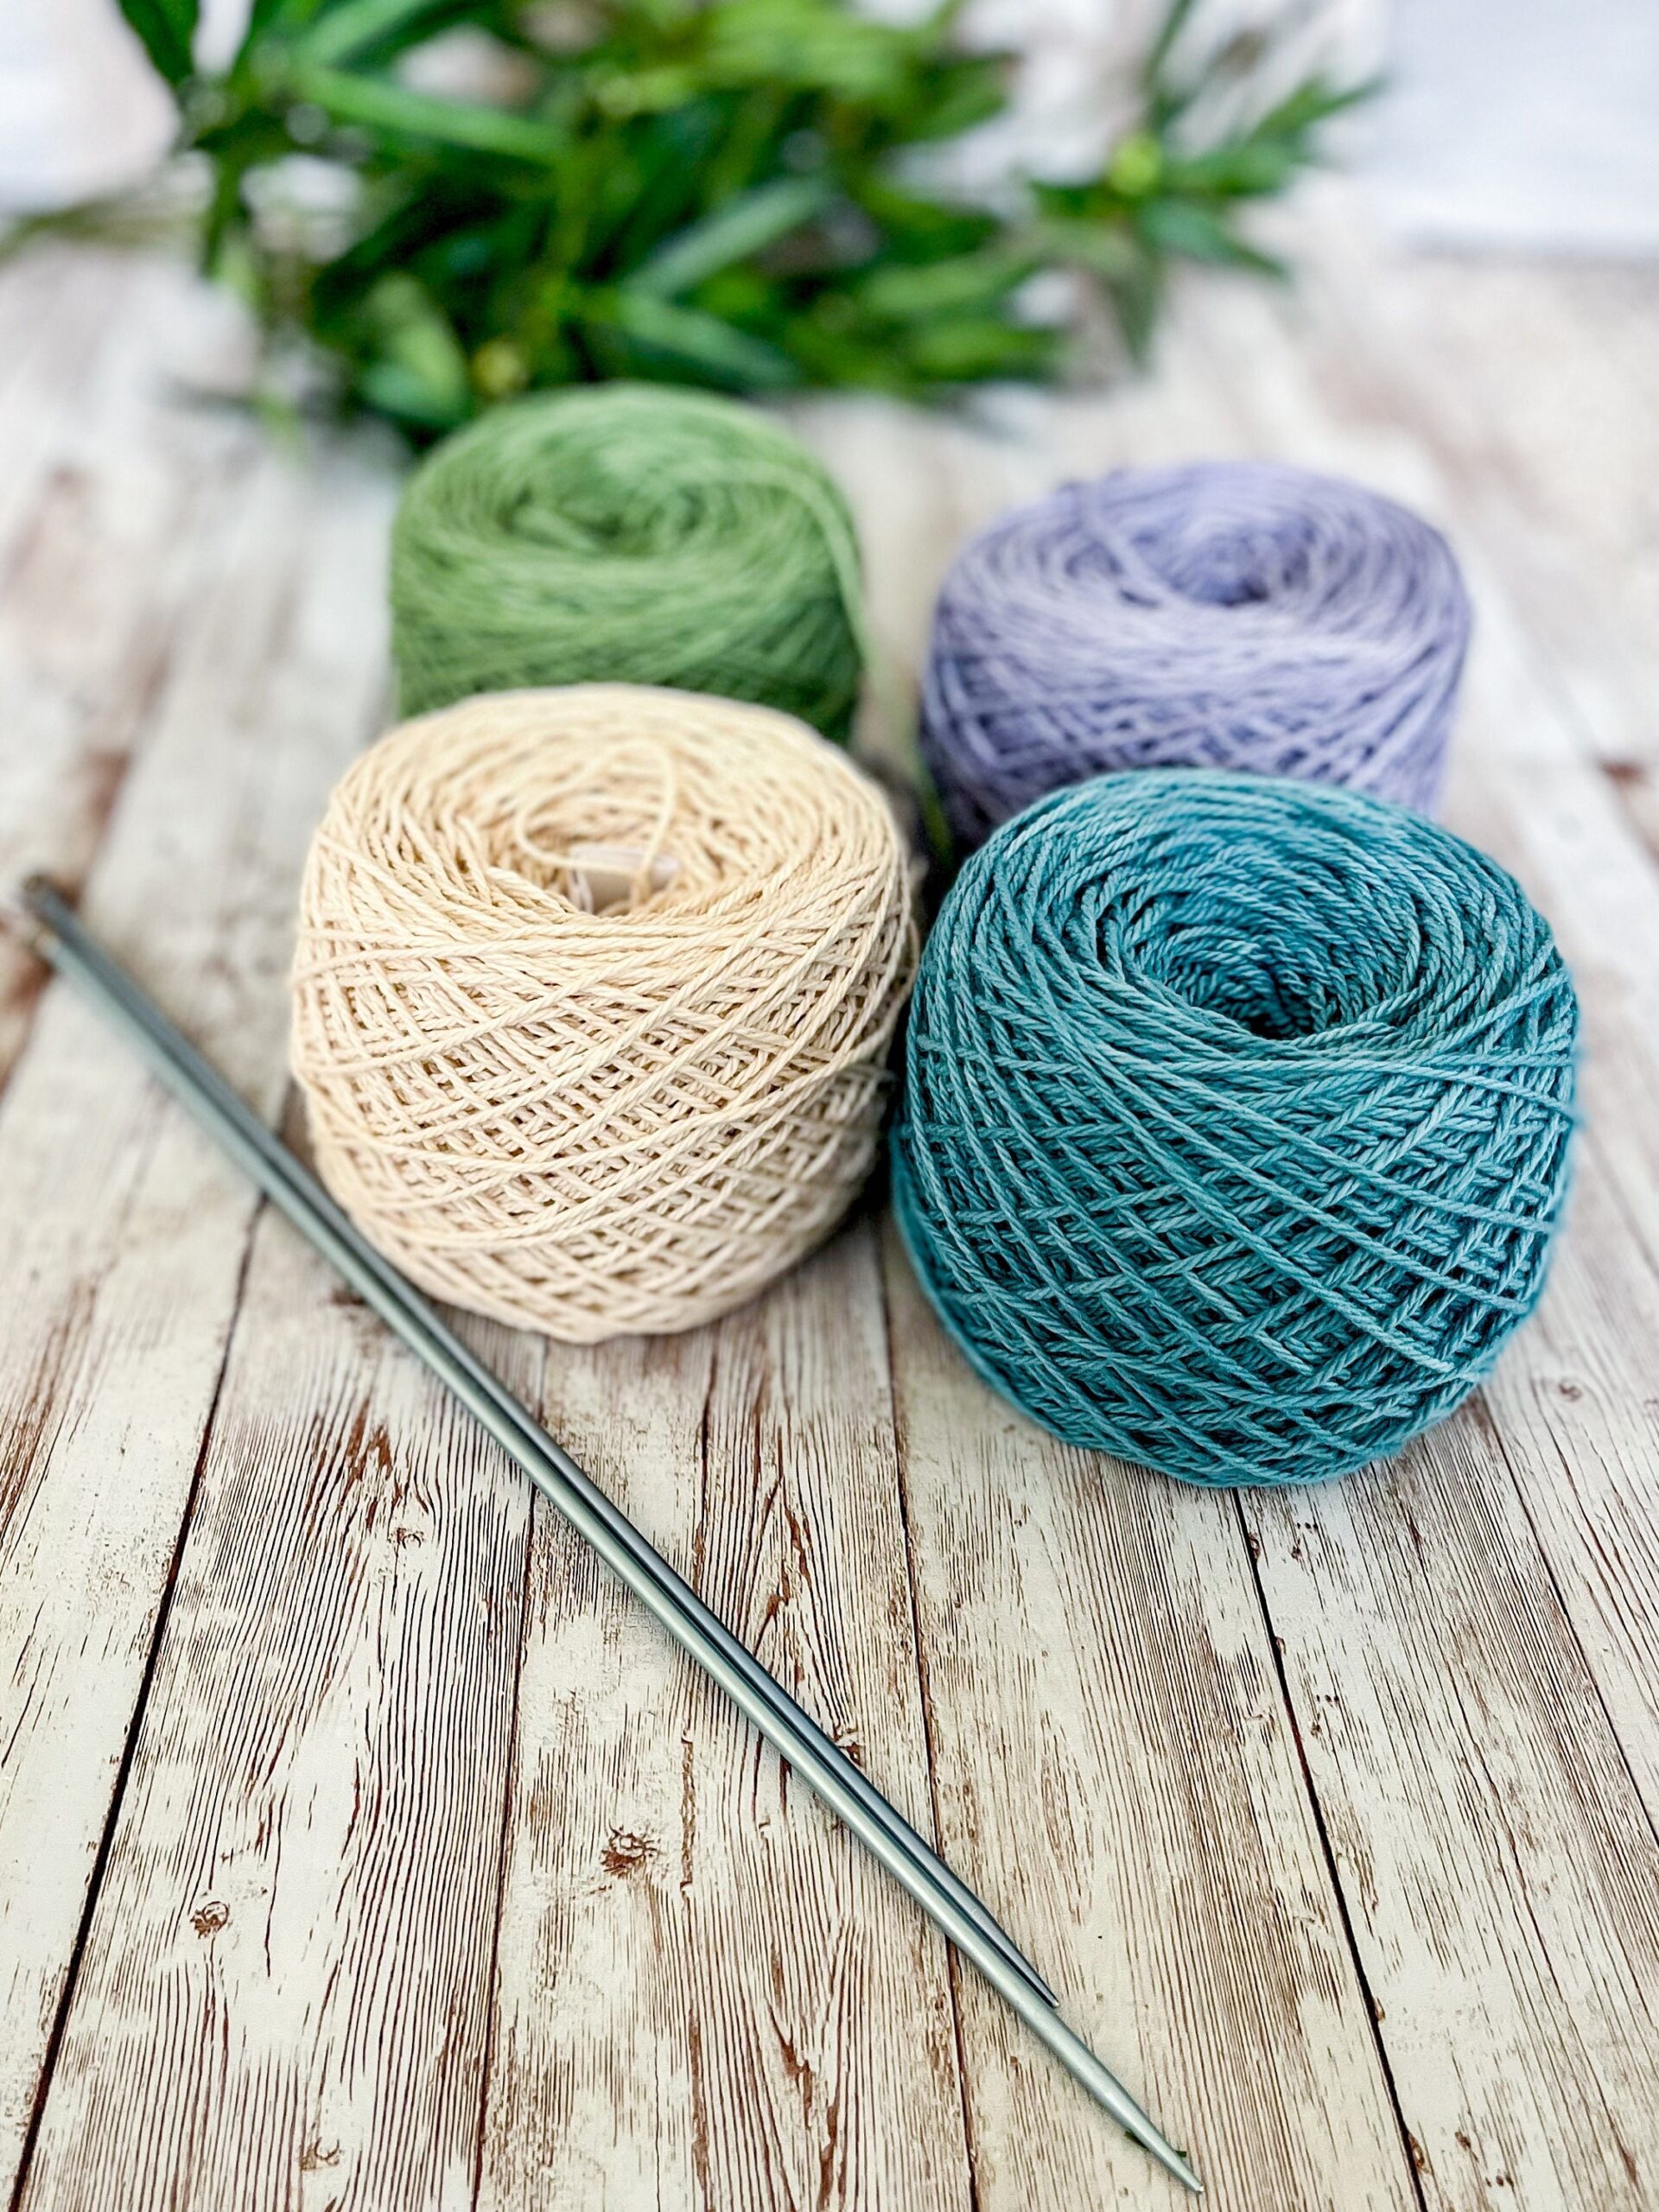 A group of 4 center pull cakes of yarn rest on a plank of wood with a pair of knitting needles in the bottom left corner and greenery in the background. The yarn is 4 cakes of Virginia grown cotton in an undyed white, blue, green, and purple colors